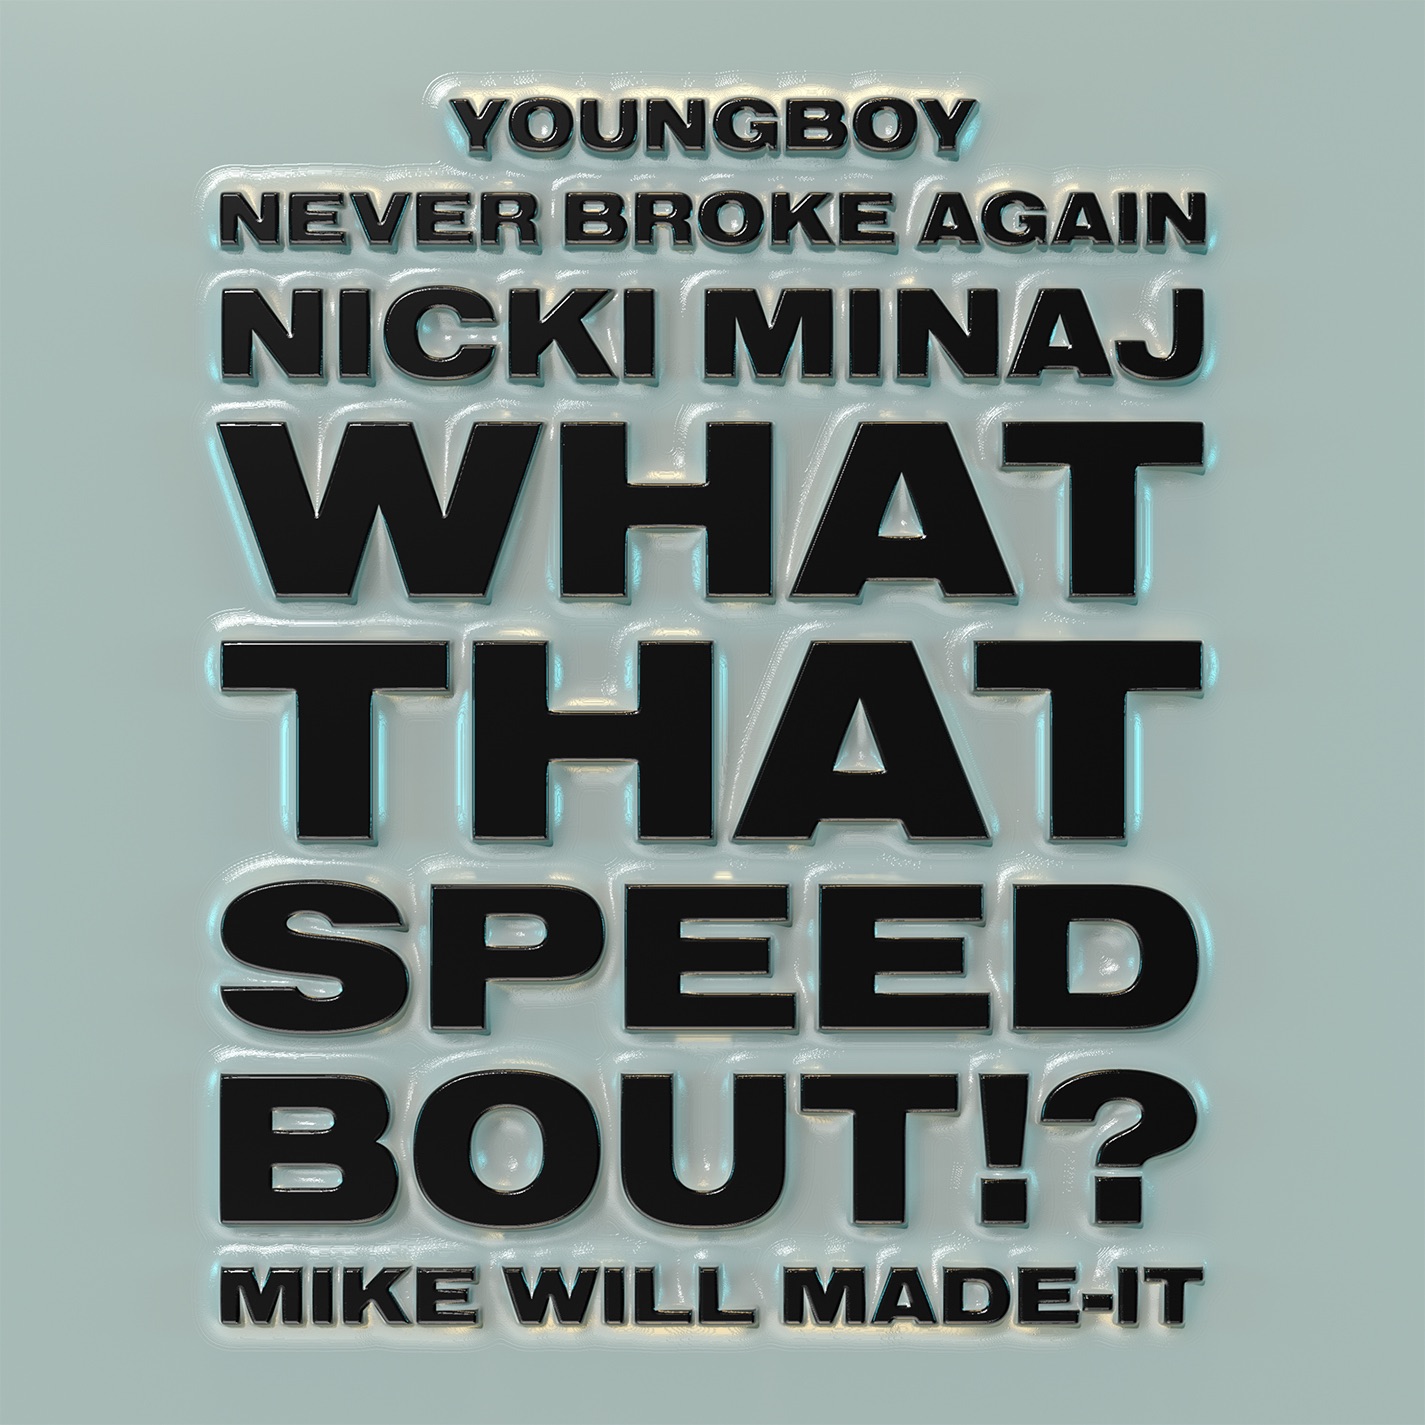 Mike WiLL Made-It - What That Speed Bout!? (feat. Nicki Minaj & YoungBoy Never Broke Again) - Single